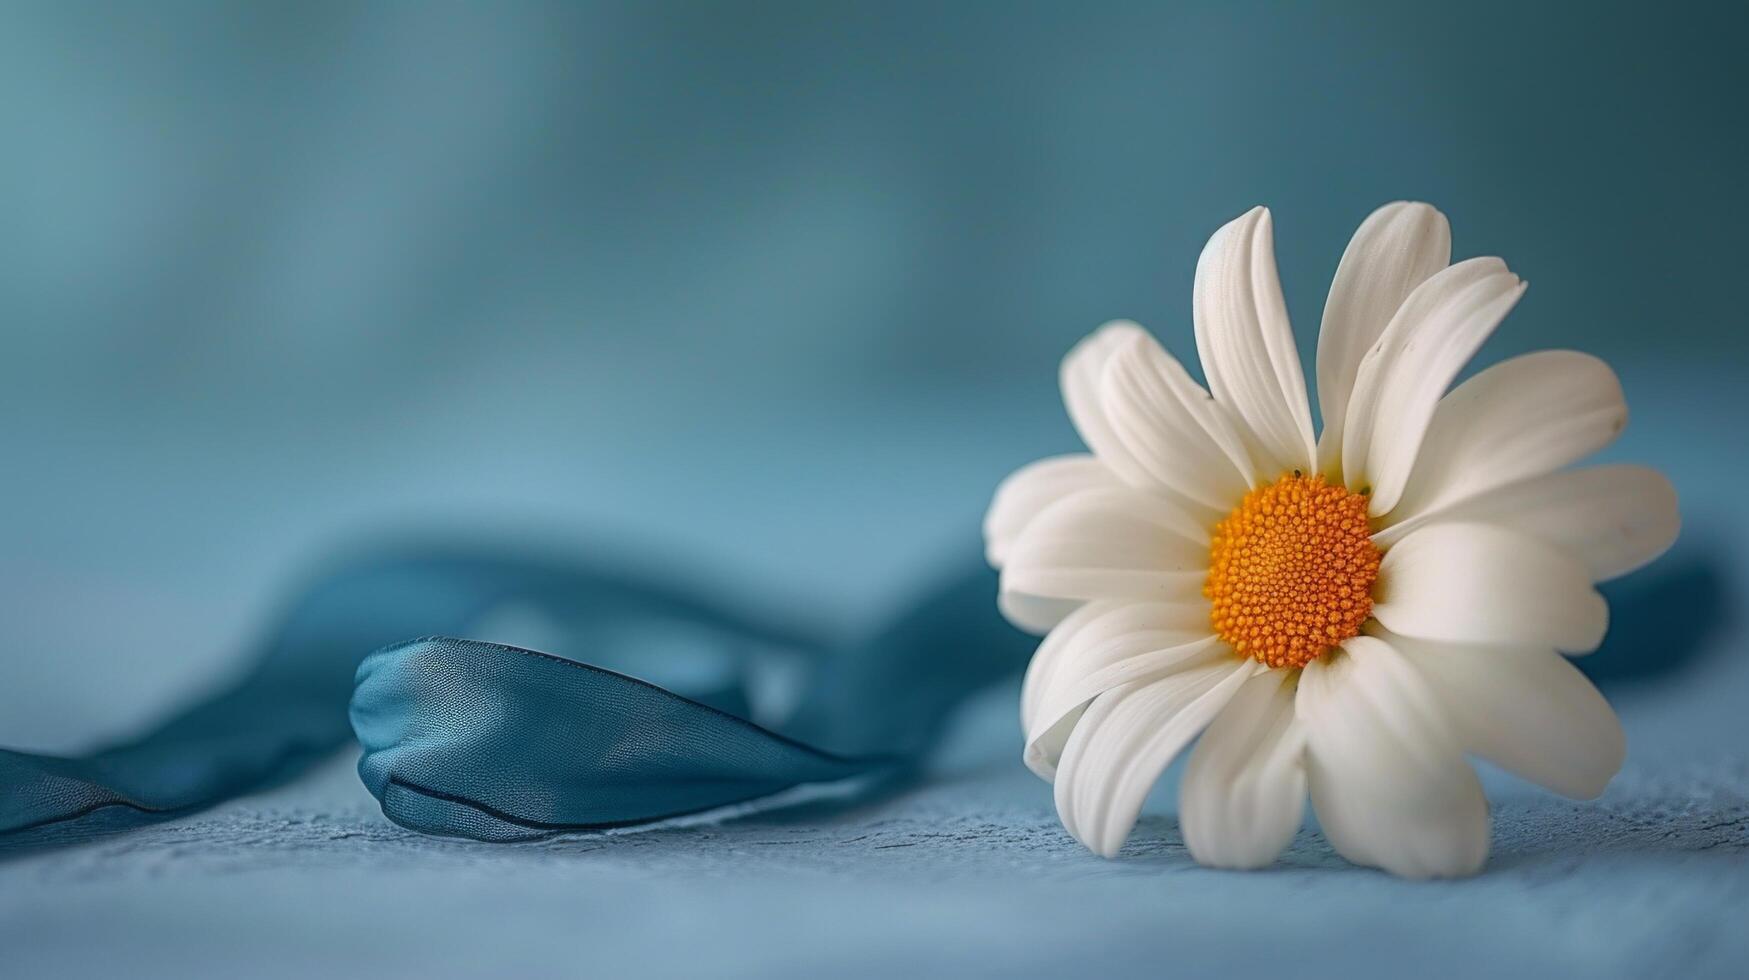 AI generated a single daisy with a blue ribbon, a subtle nod to Labor Day's colors photo